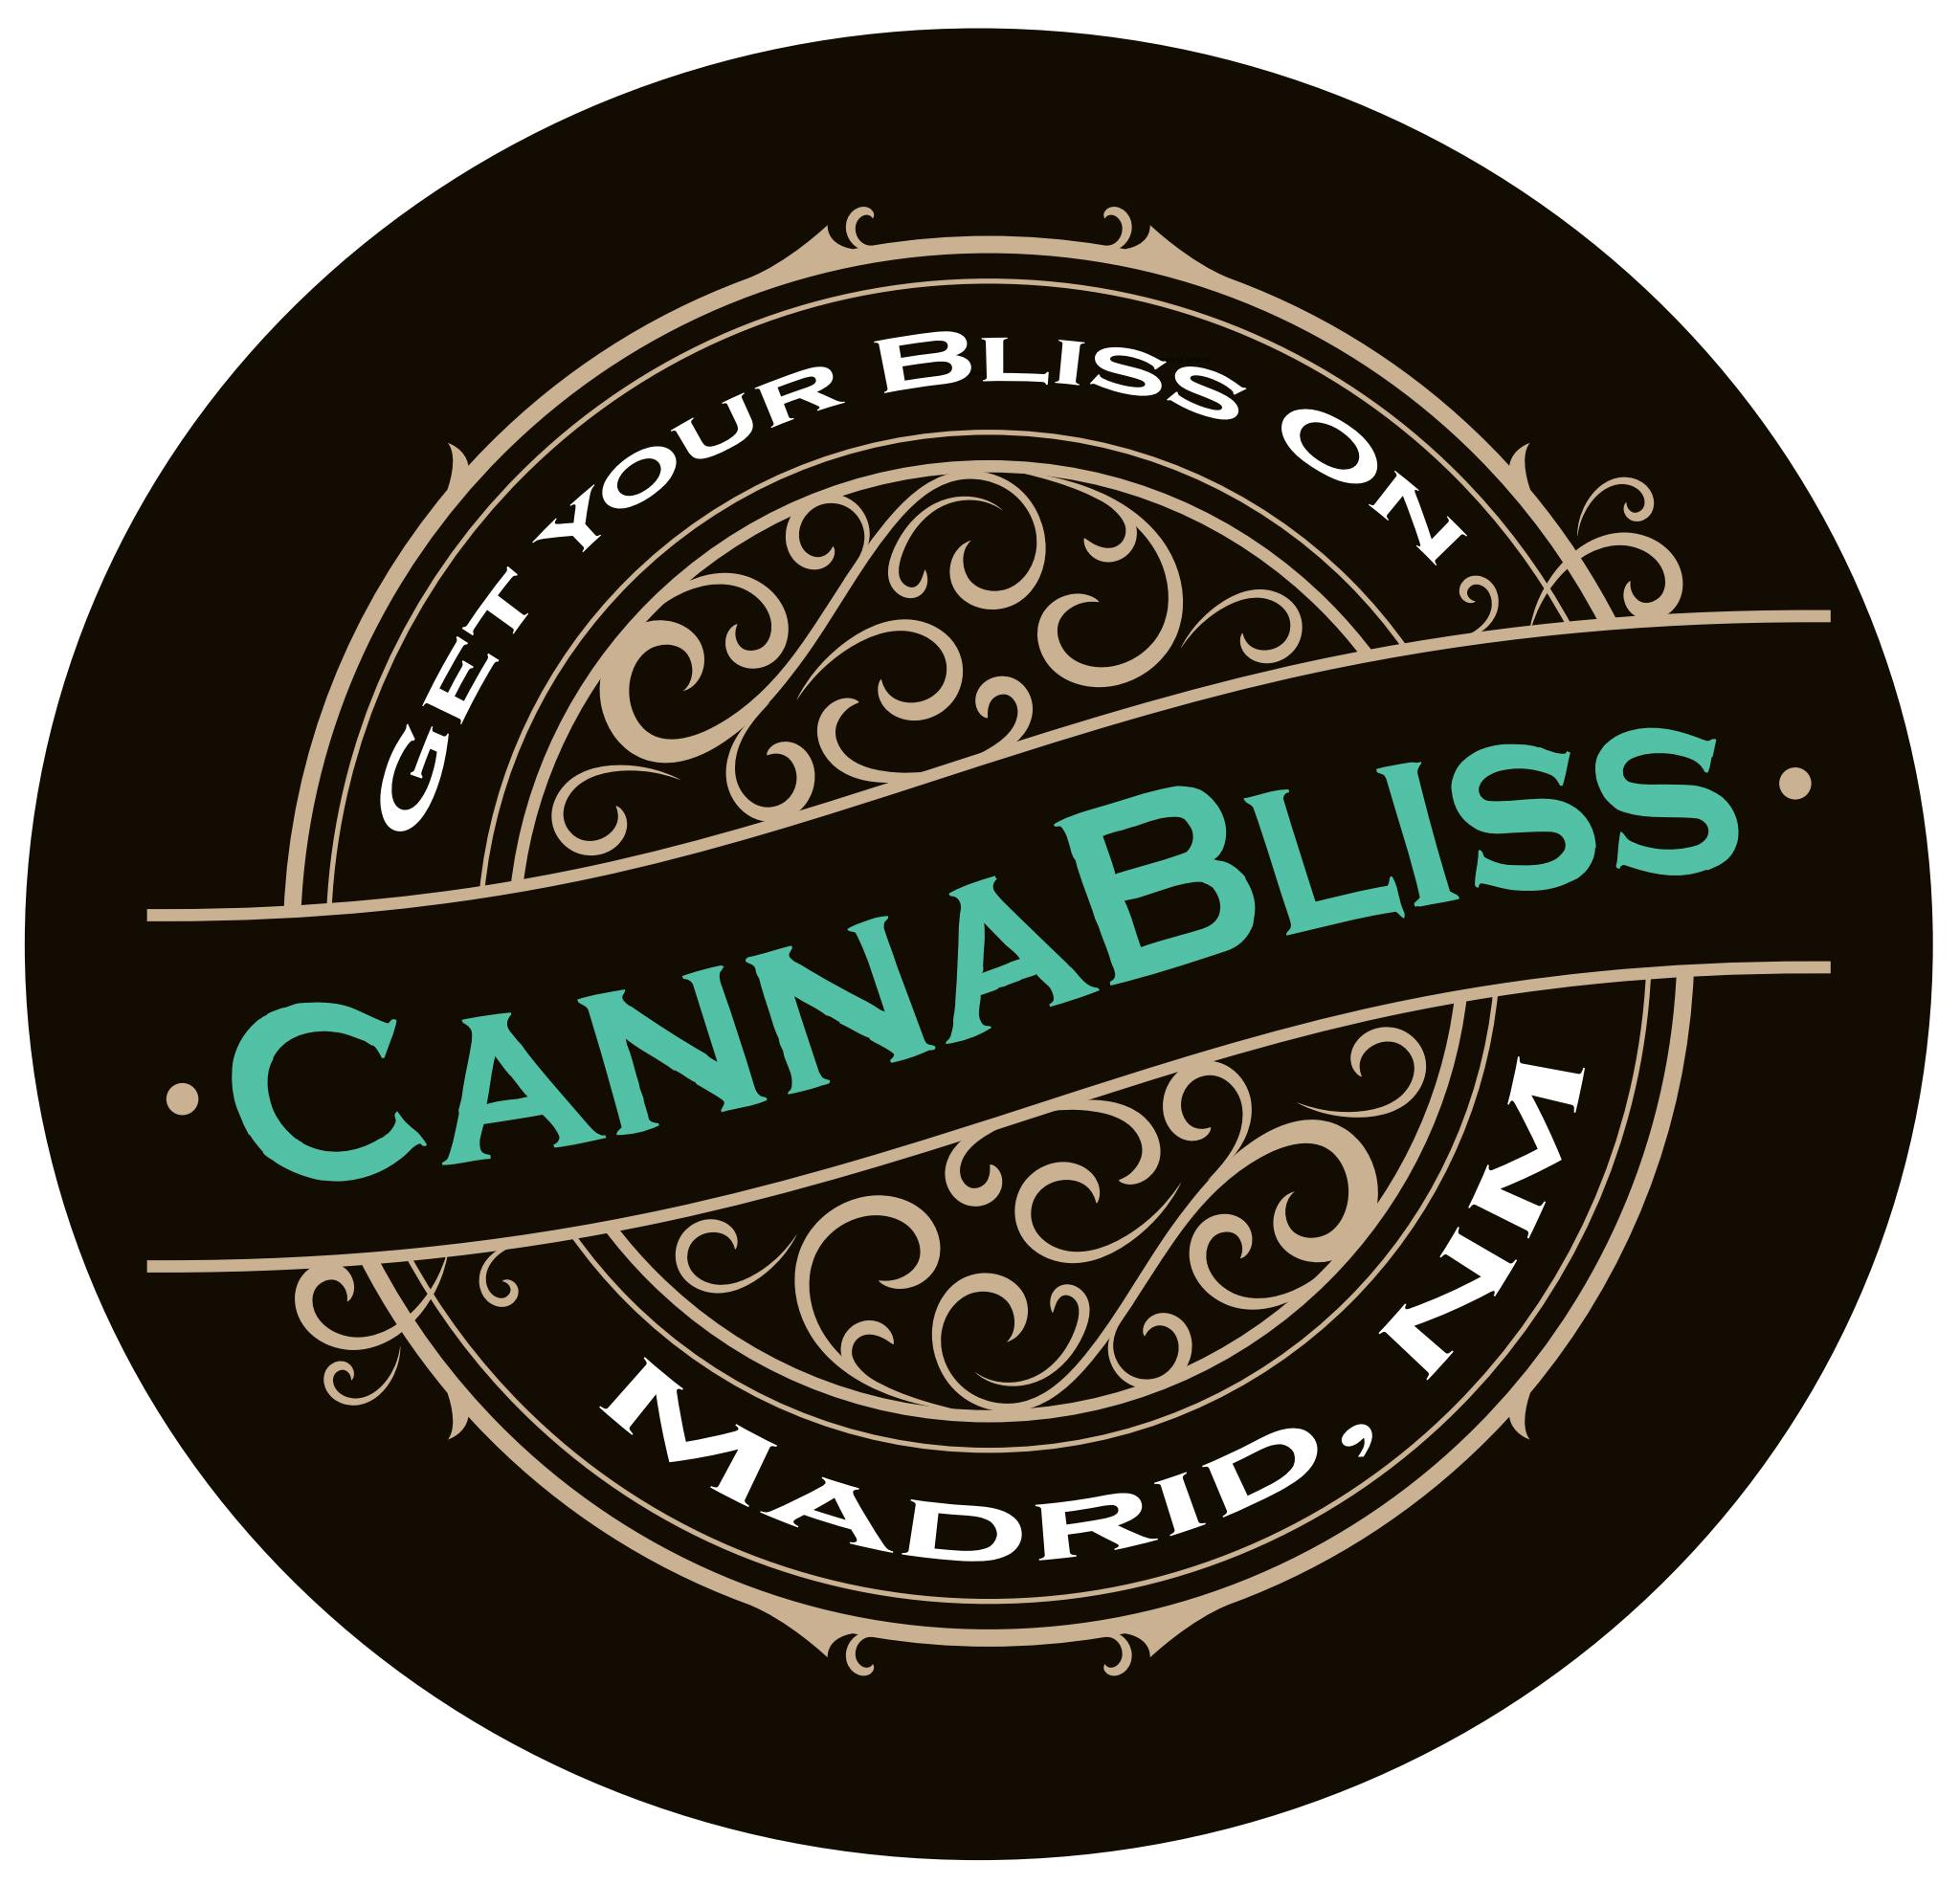 CannaBliss Cannabis Dispensary and Boutique